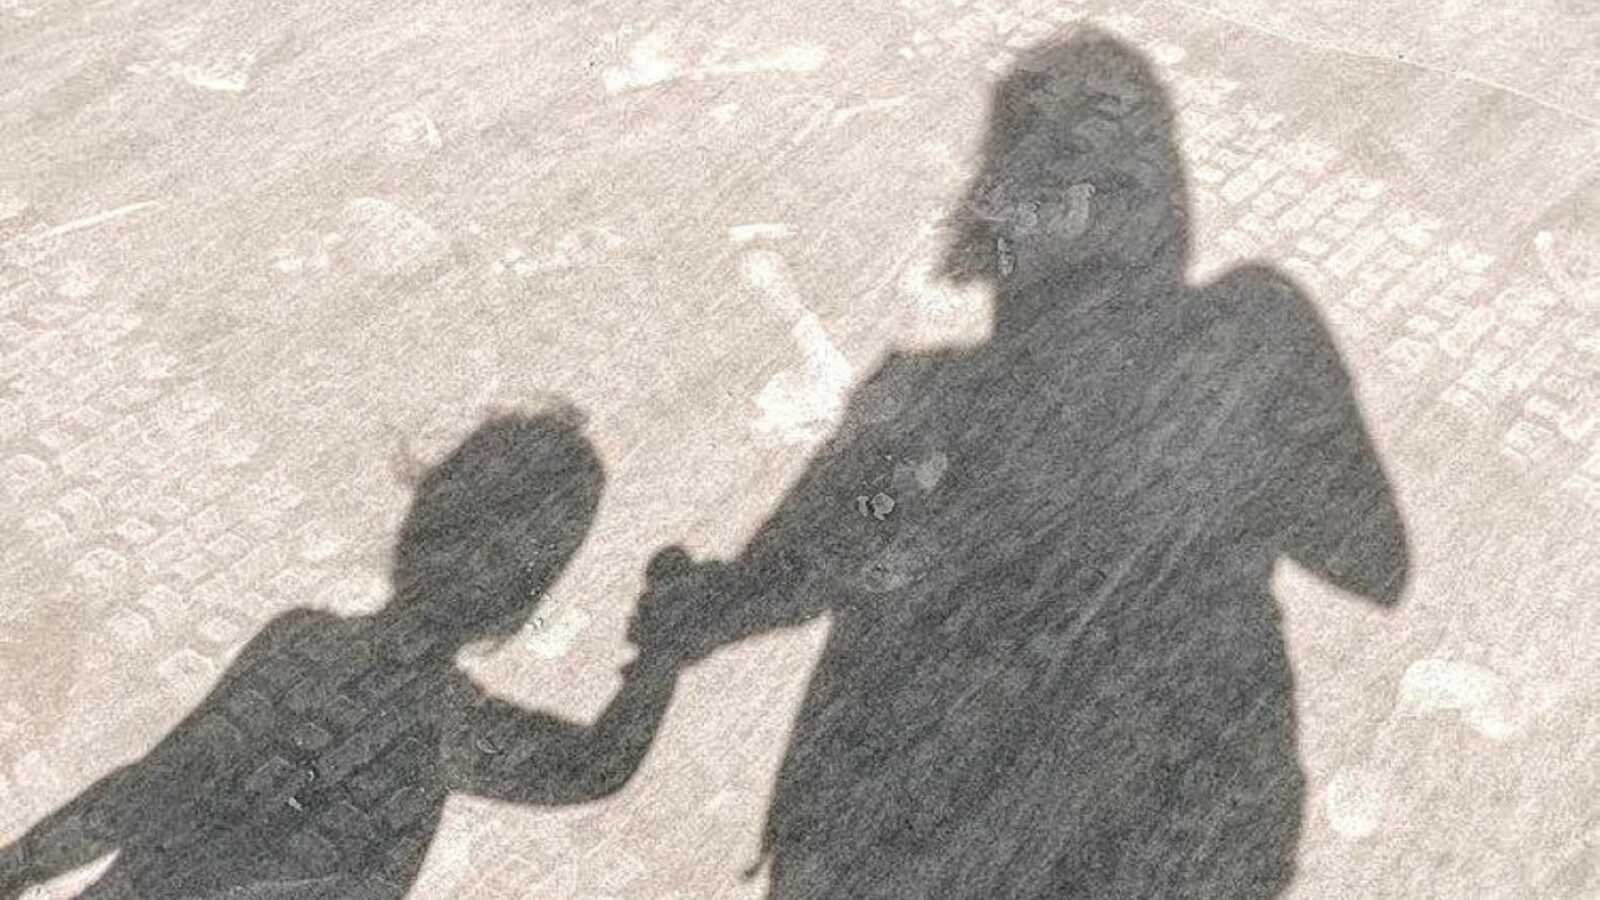 Mom and daughter take a photo of their shadow while walking hand-in-hand